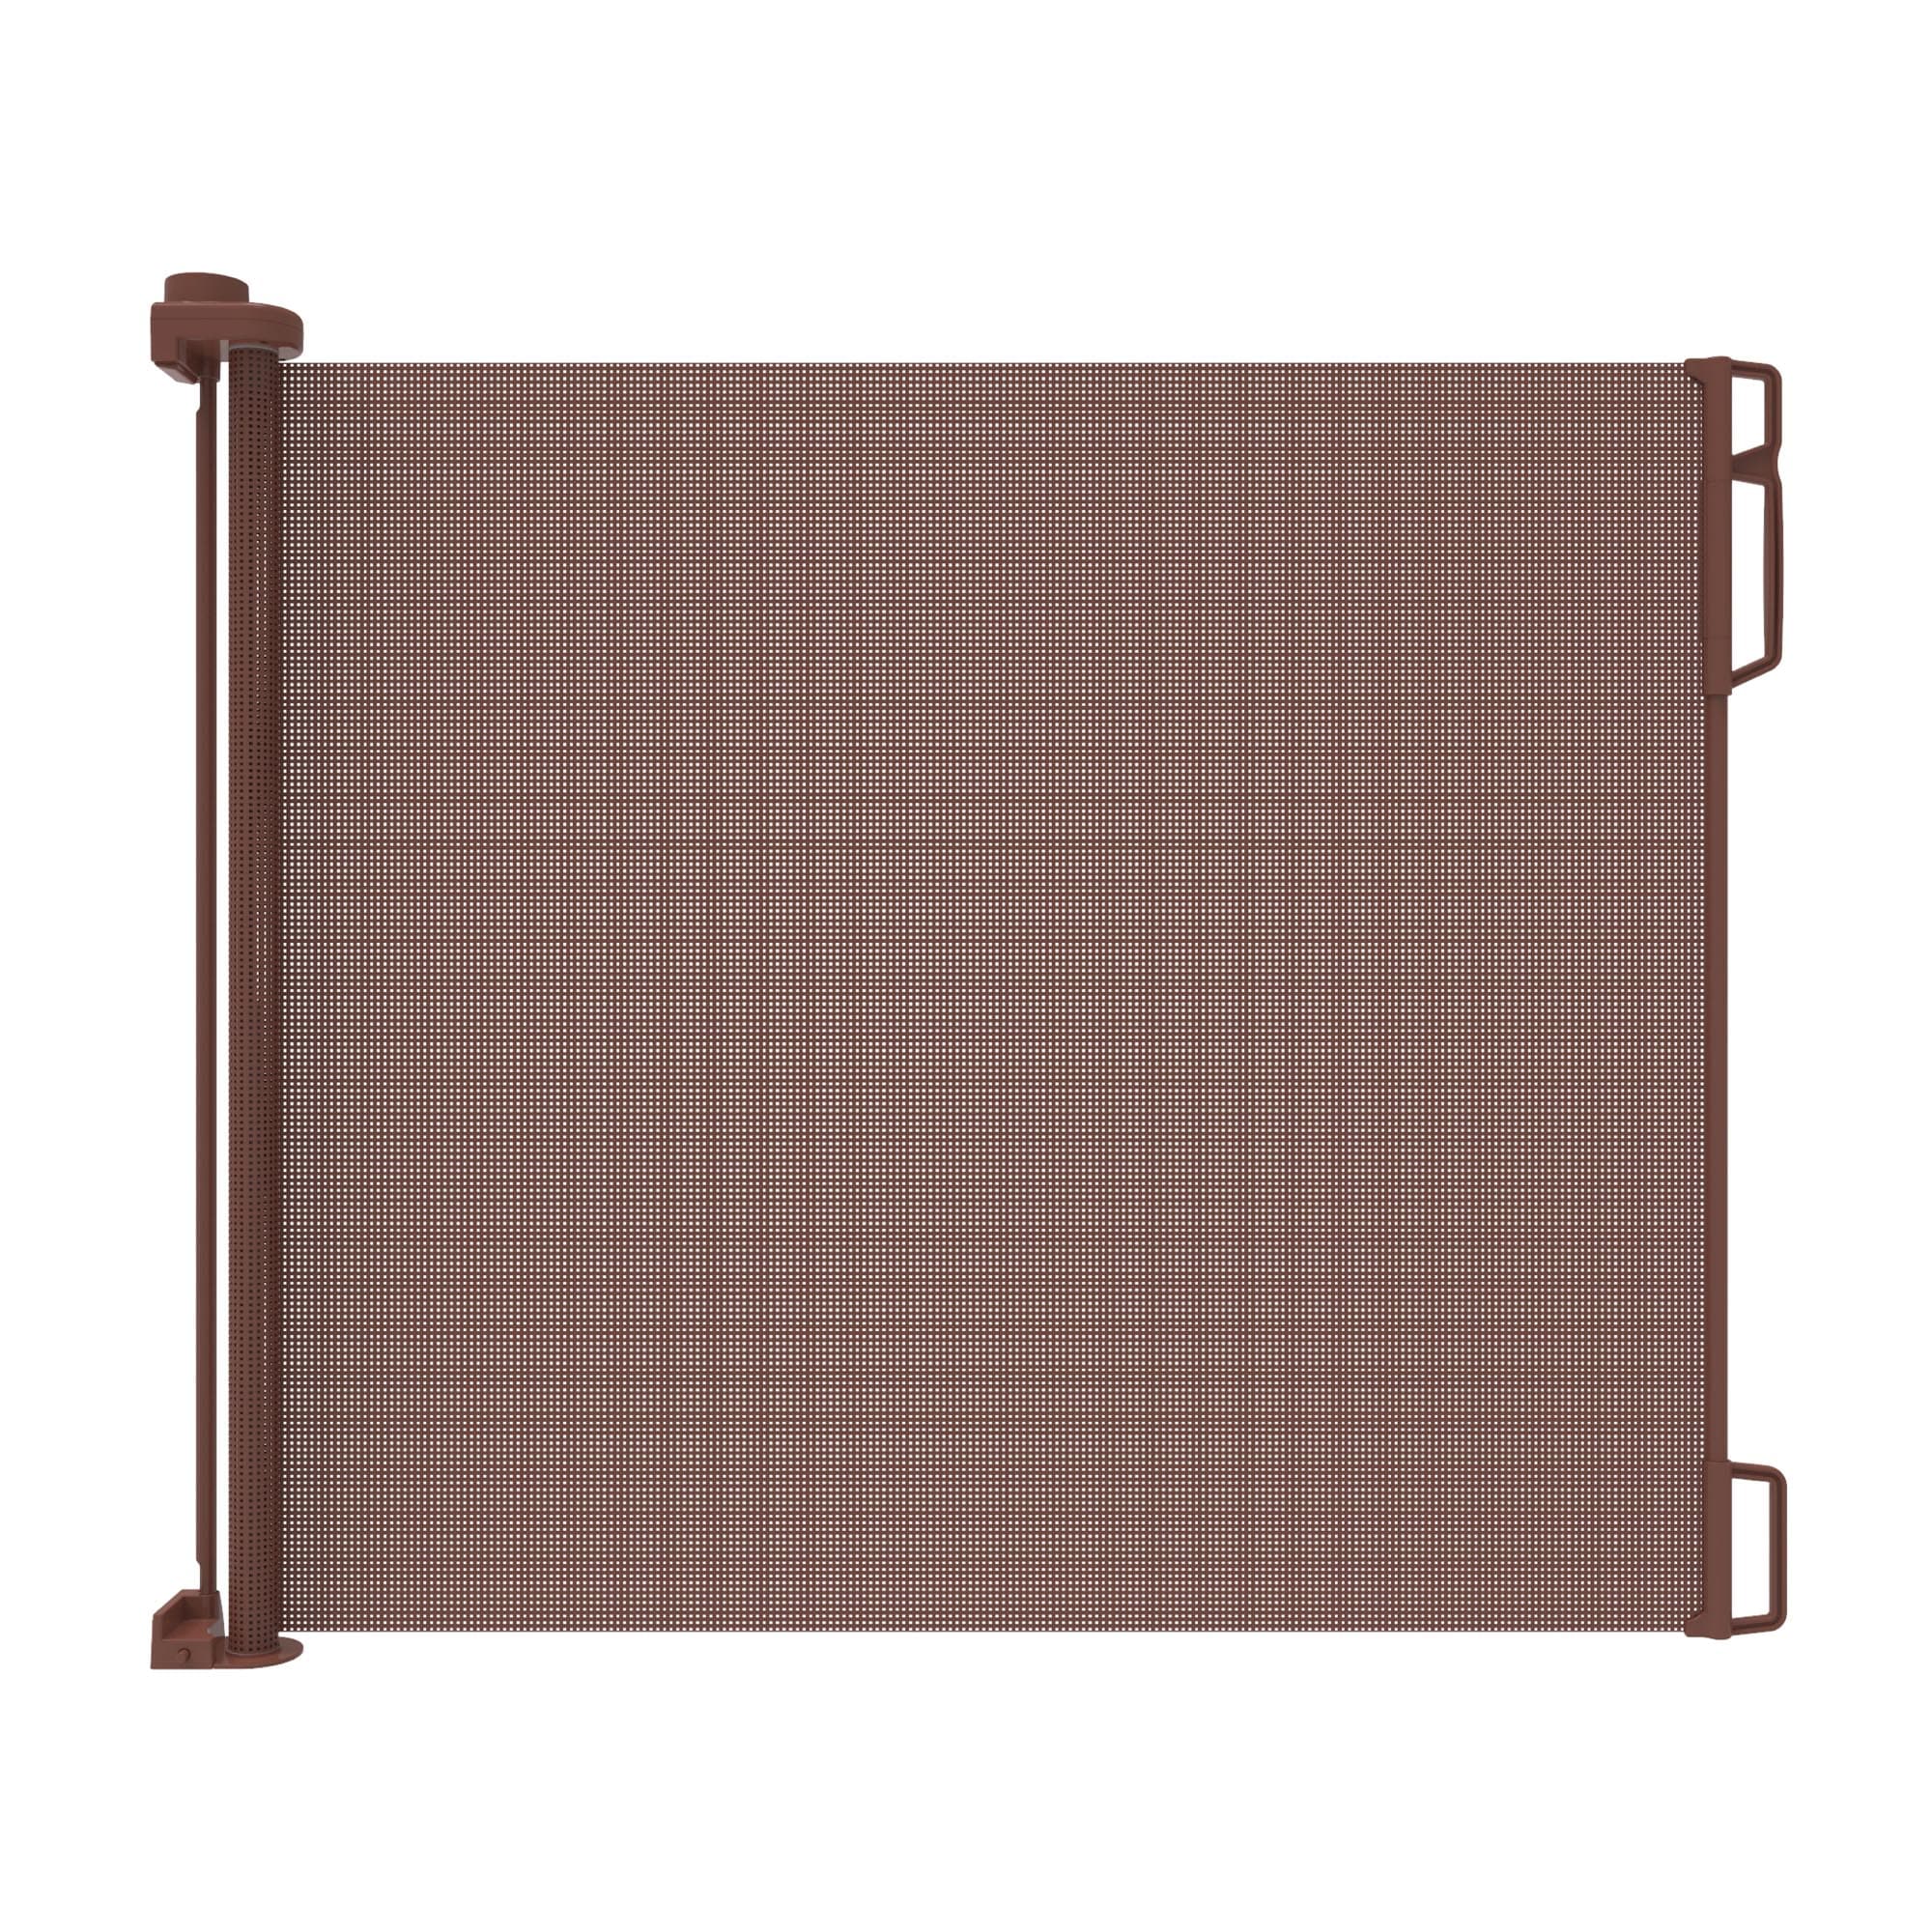 Retractable Baby Gate 71-in x 33-in Hardware Mounted Brown Plastic Safety Gate | - Perma Child Safety 2701